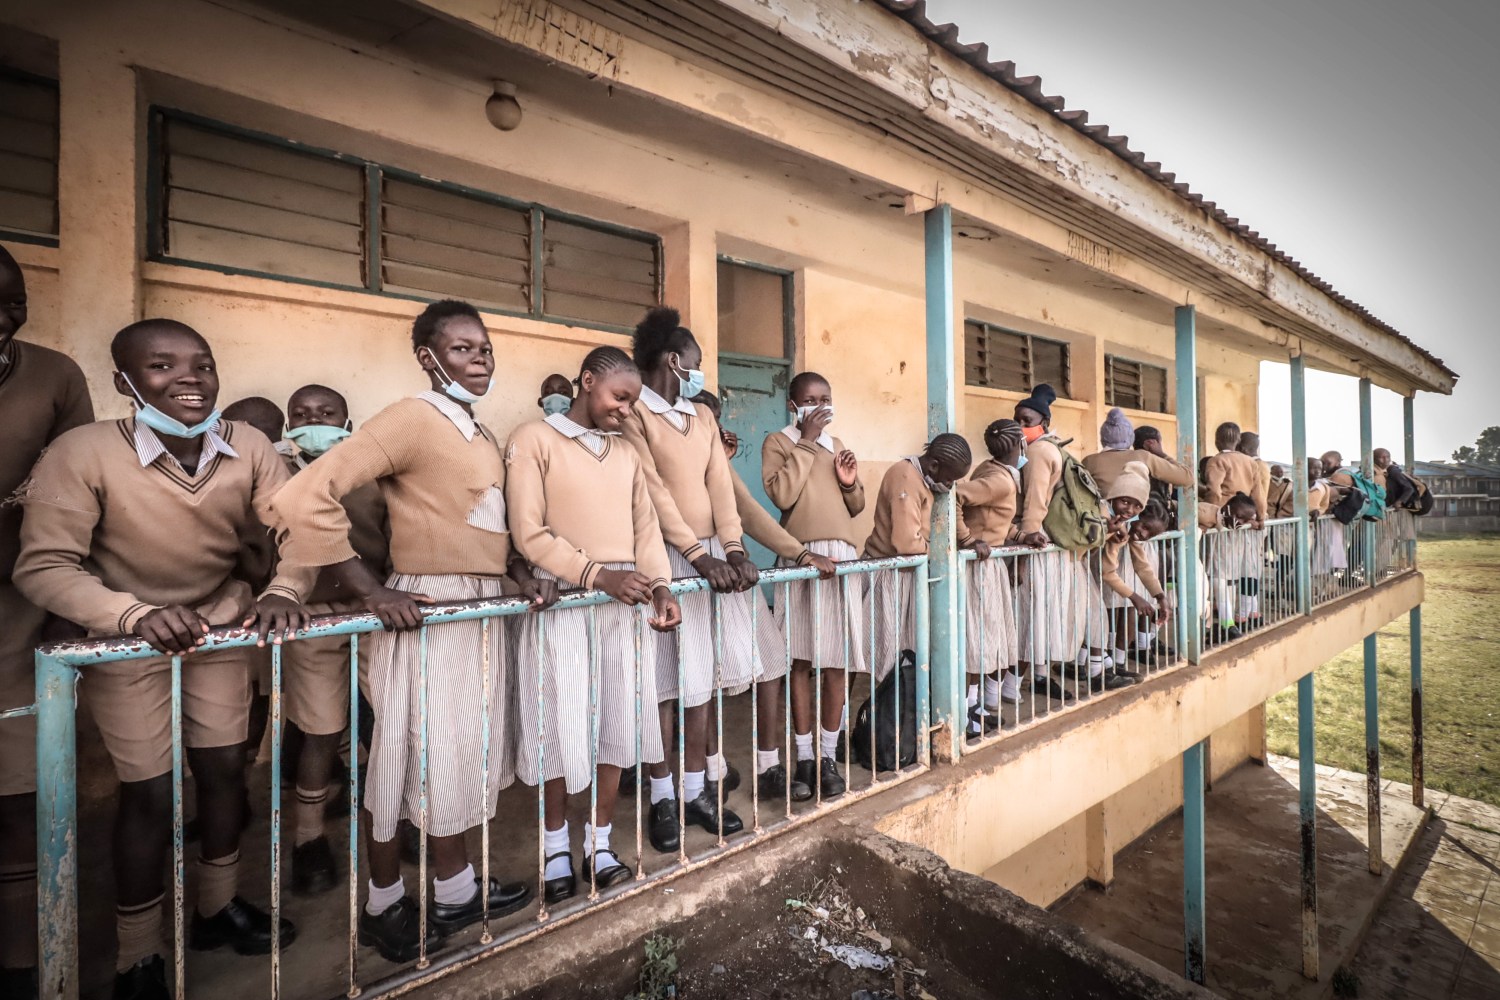 Pupils wait outside their classes at Ayany Primary School during the arrangement of their seating positions  to create social distance after a nine months period of no school due to the coronavirus pandemic. (Photo by Donwilson Odhiambo / SOPA Images/Sipa USA)No Use UK. No Use Germany.